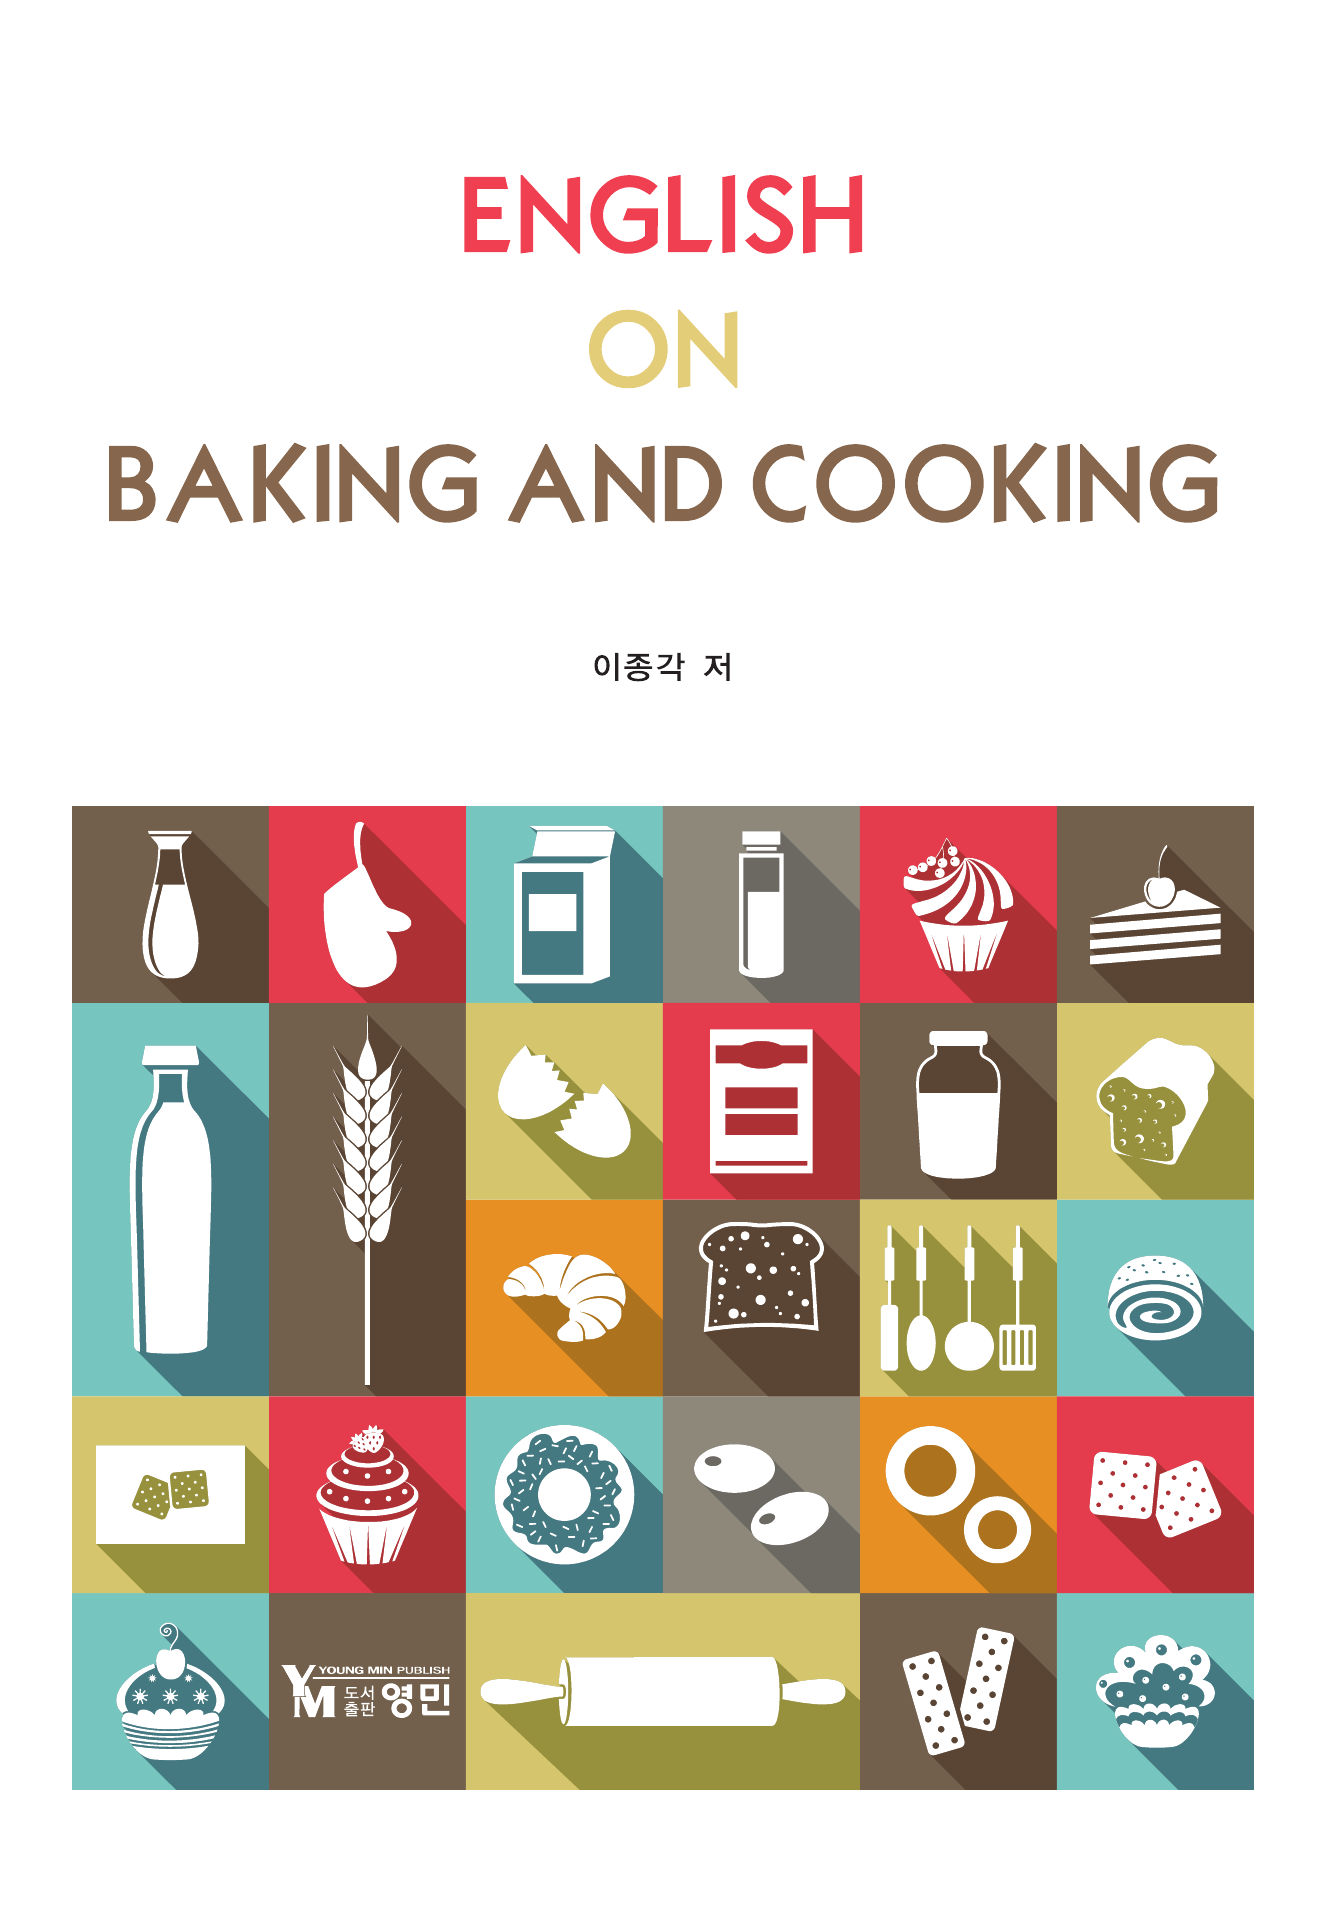 English on Baking and Cooking